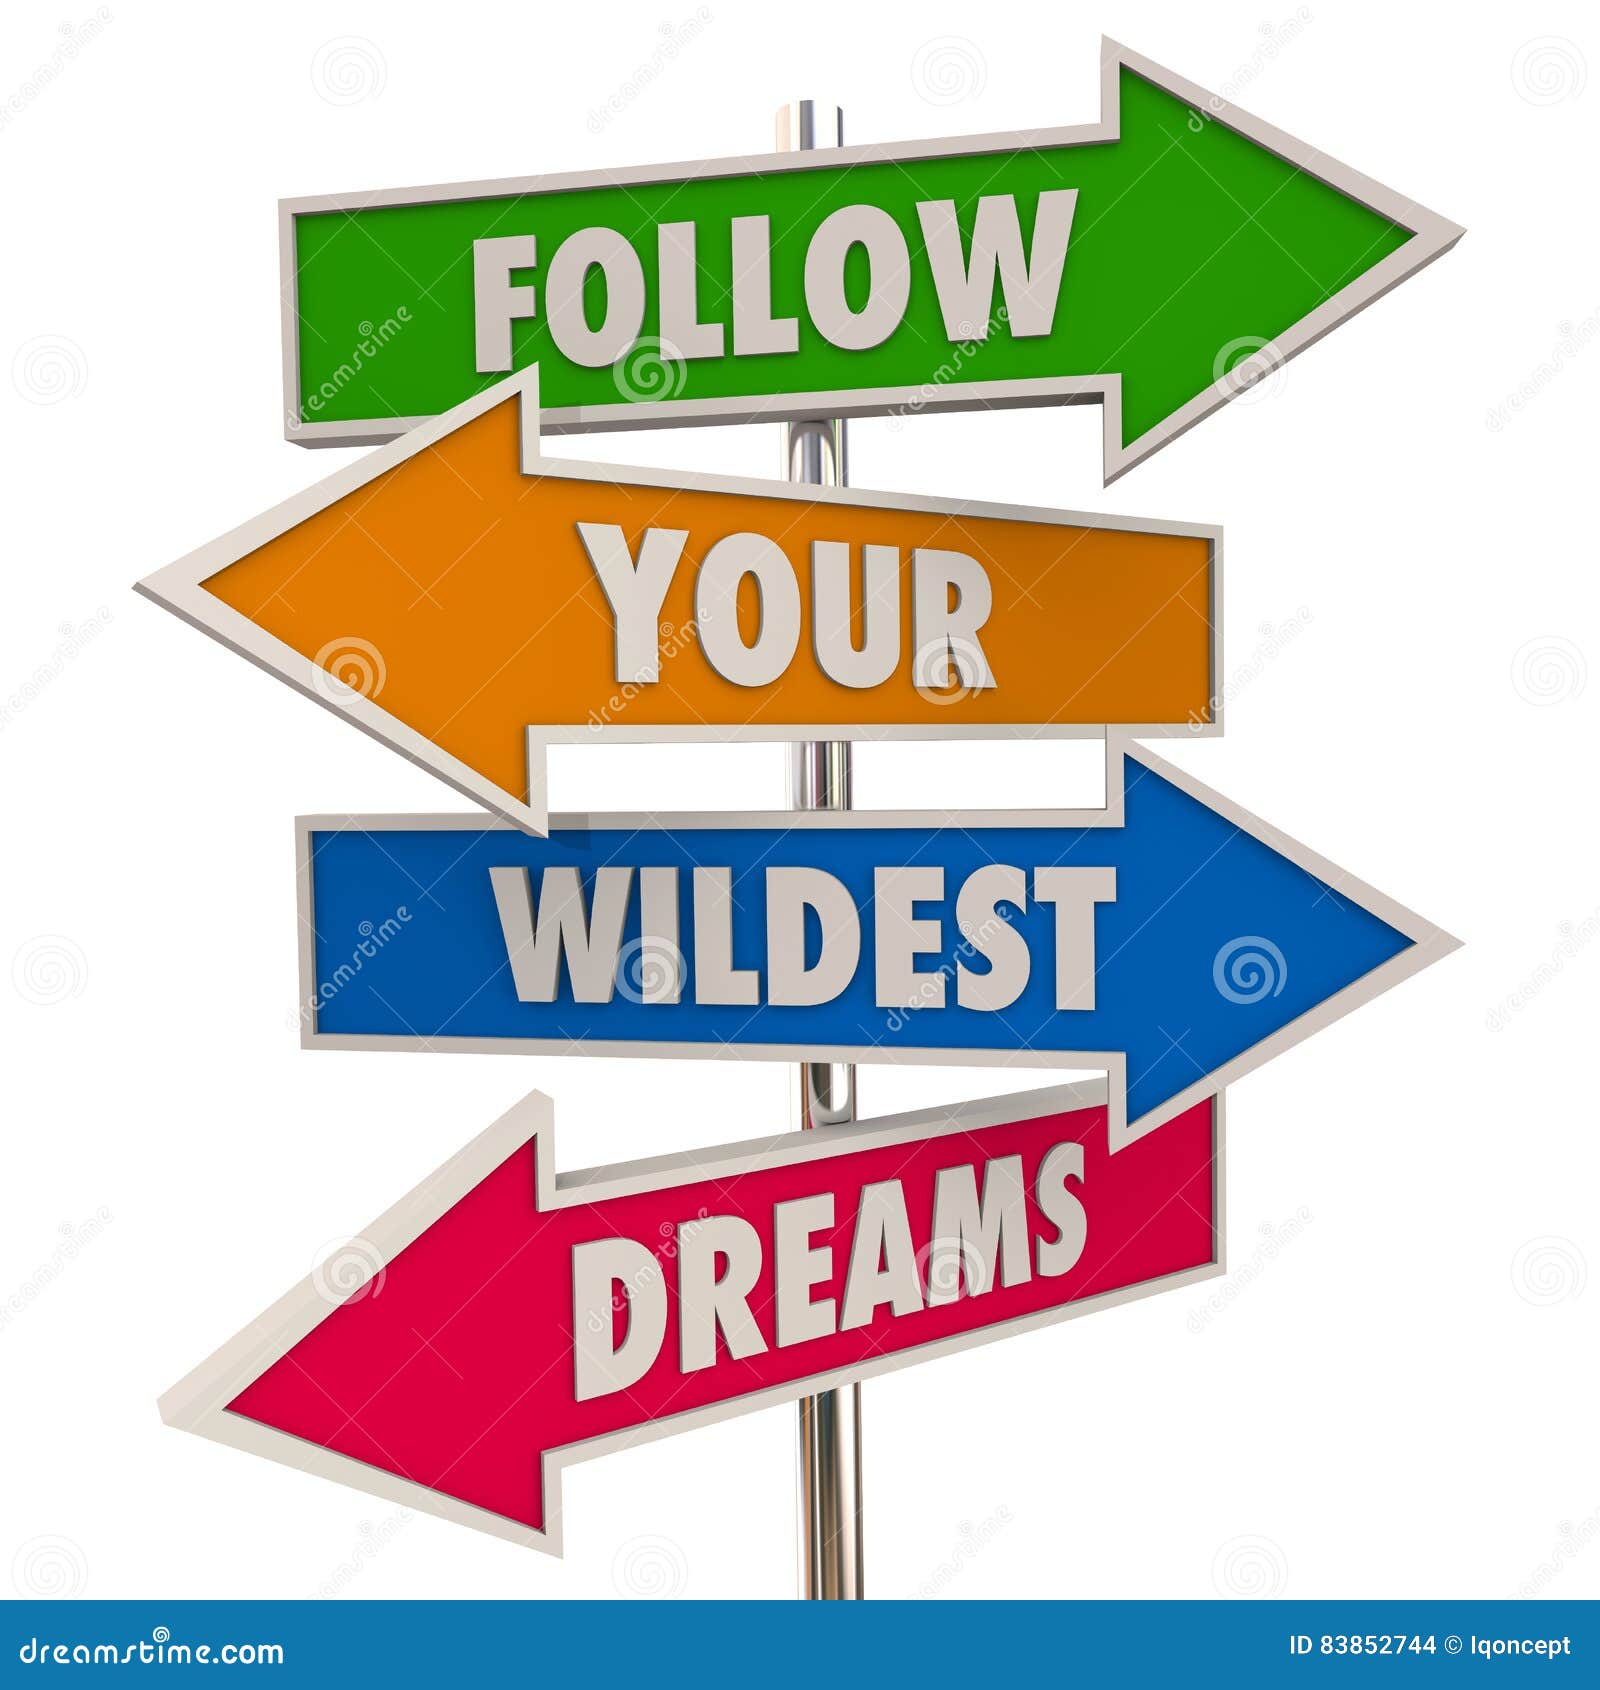 follow your wildest dreams hopes desires signs